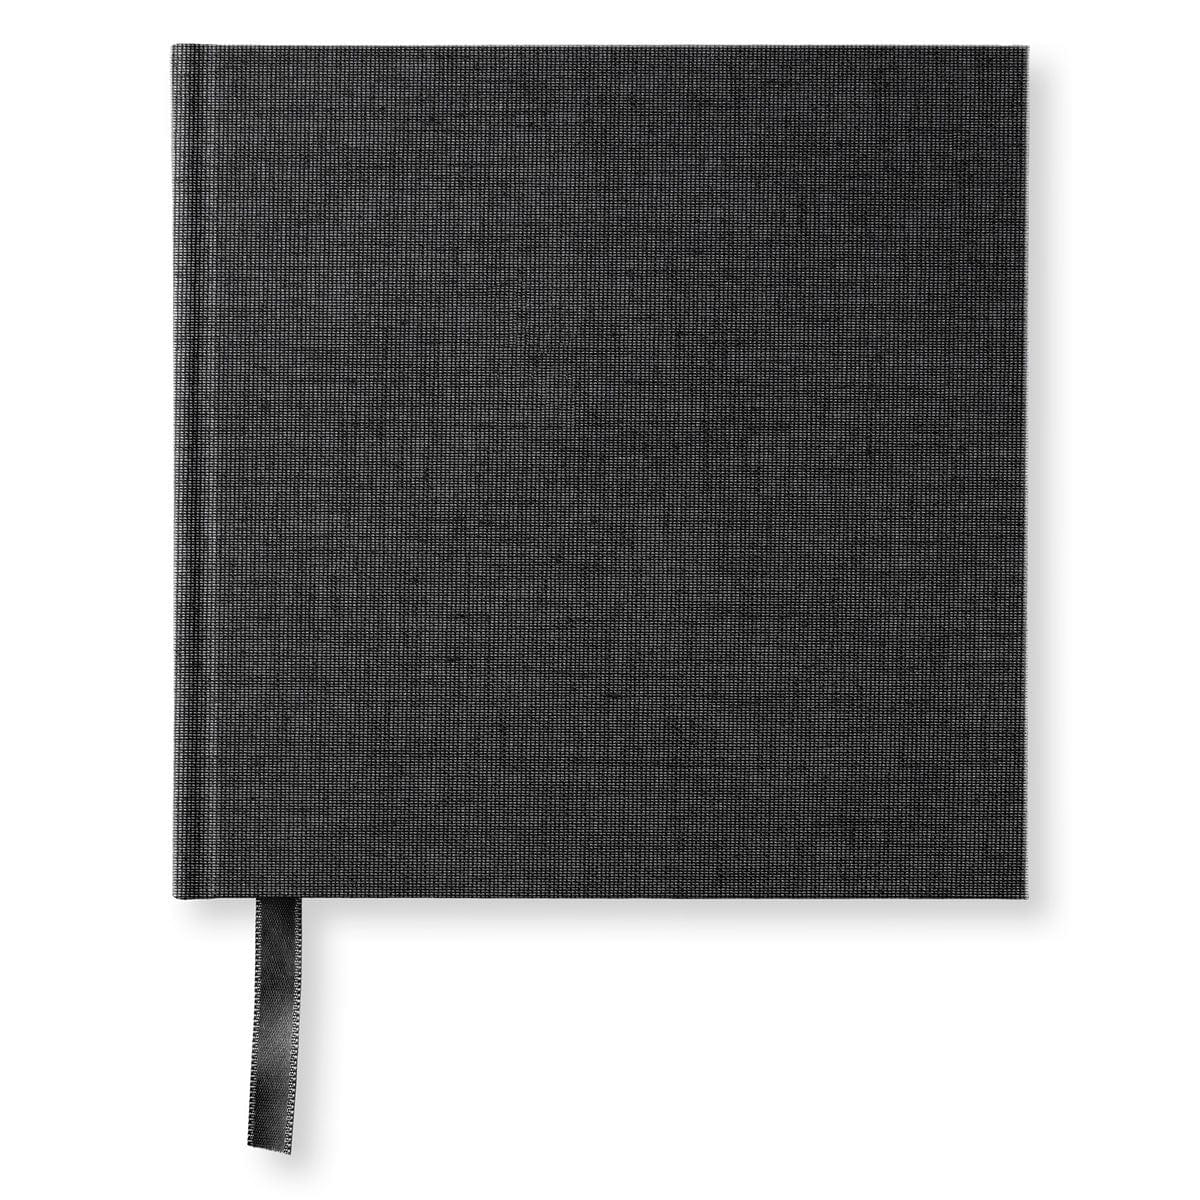 PaperStyle PS BLANK BOOK 185 x 185 Transparent Black